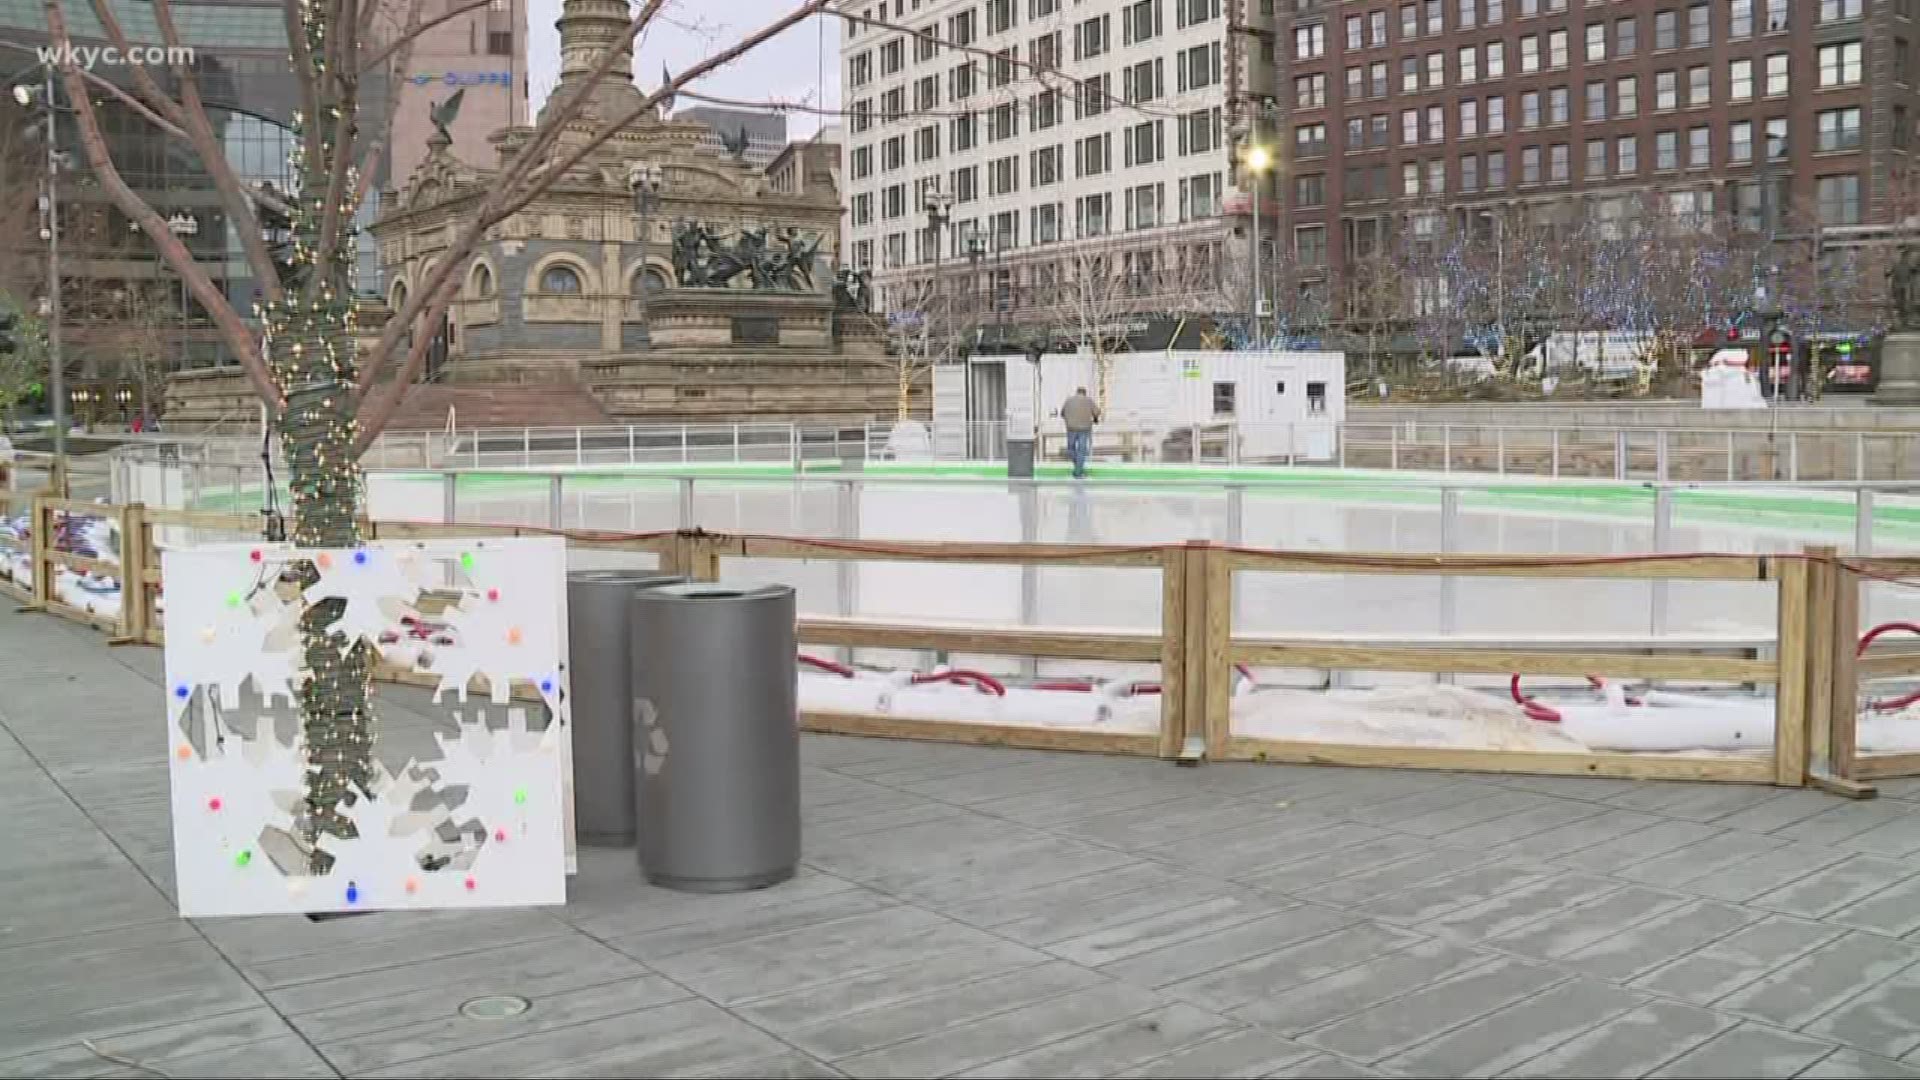 The lights are hung, and the ice-skating rink is in place in Public Square. There are many activities around Northeast Ohio to keep your family busy this weekend.